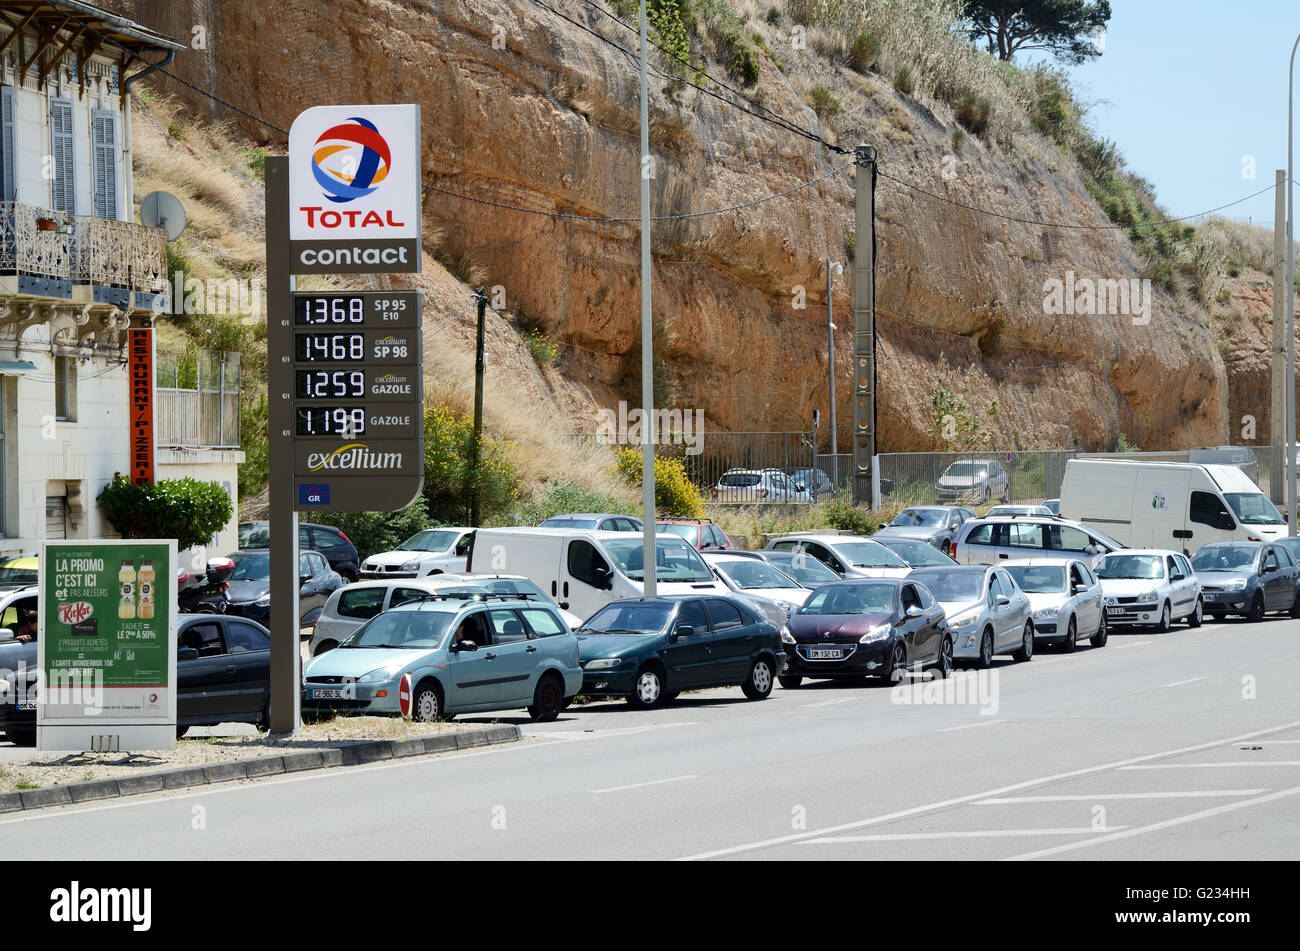 Marseille, France. 23rd May, 2016. Motorists Queue for Petrol in France. Strikes at key oil refineries in France, by workers opposed to government labour reforms, have led to petrol shortages, panic and extensive queues at petrol stations. Image photographed in Marseille, France. Credit:  Chris Hellier/Alamy Live News Stock Photo